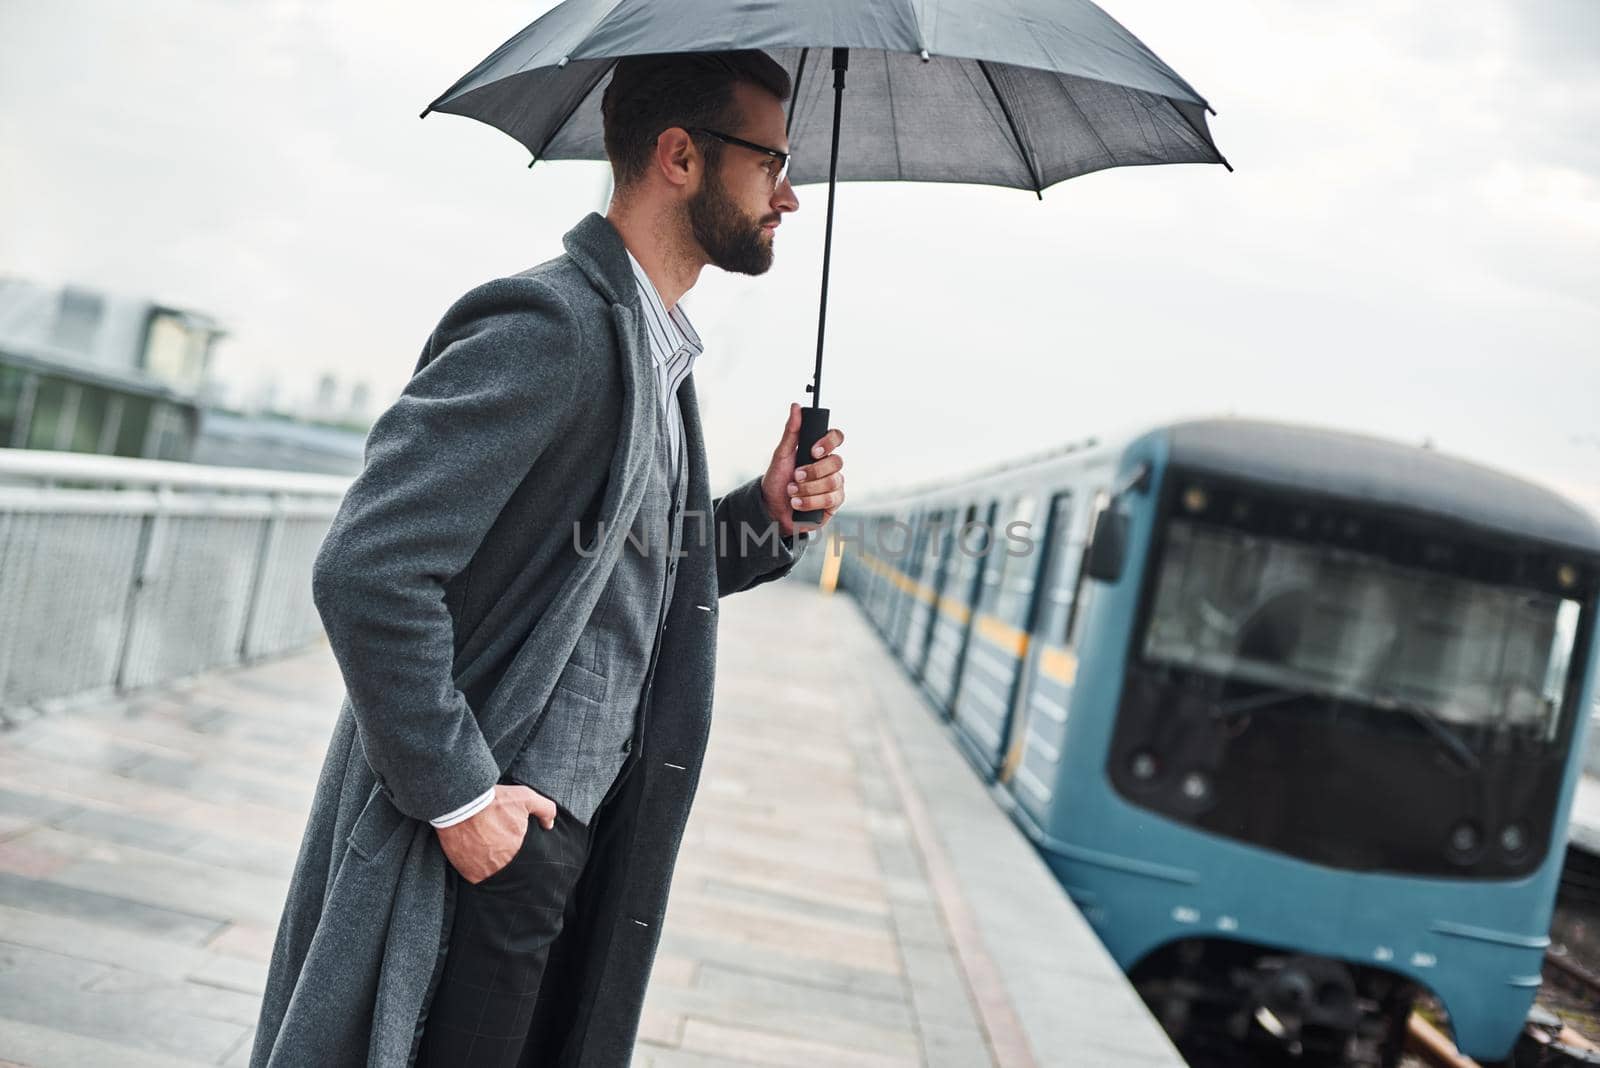 Waiting for train. Young businessman standing near railway under umbrella